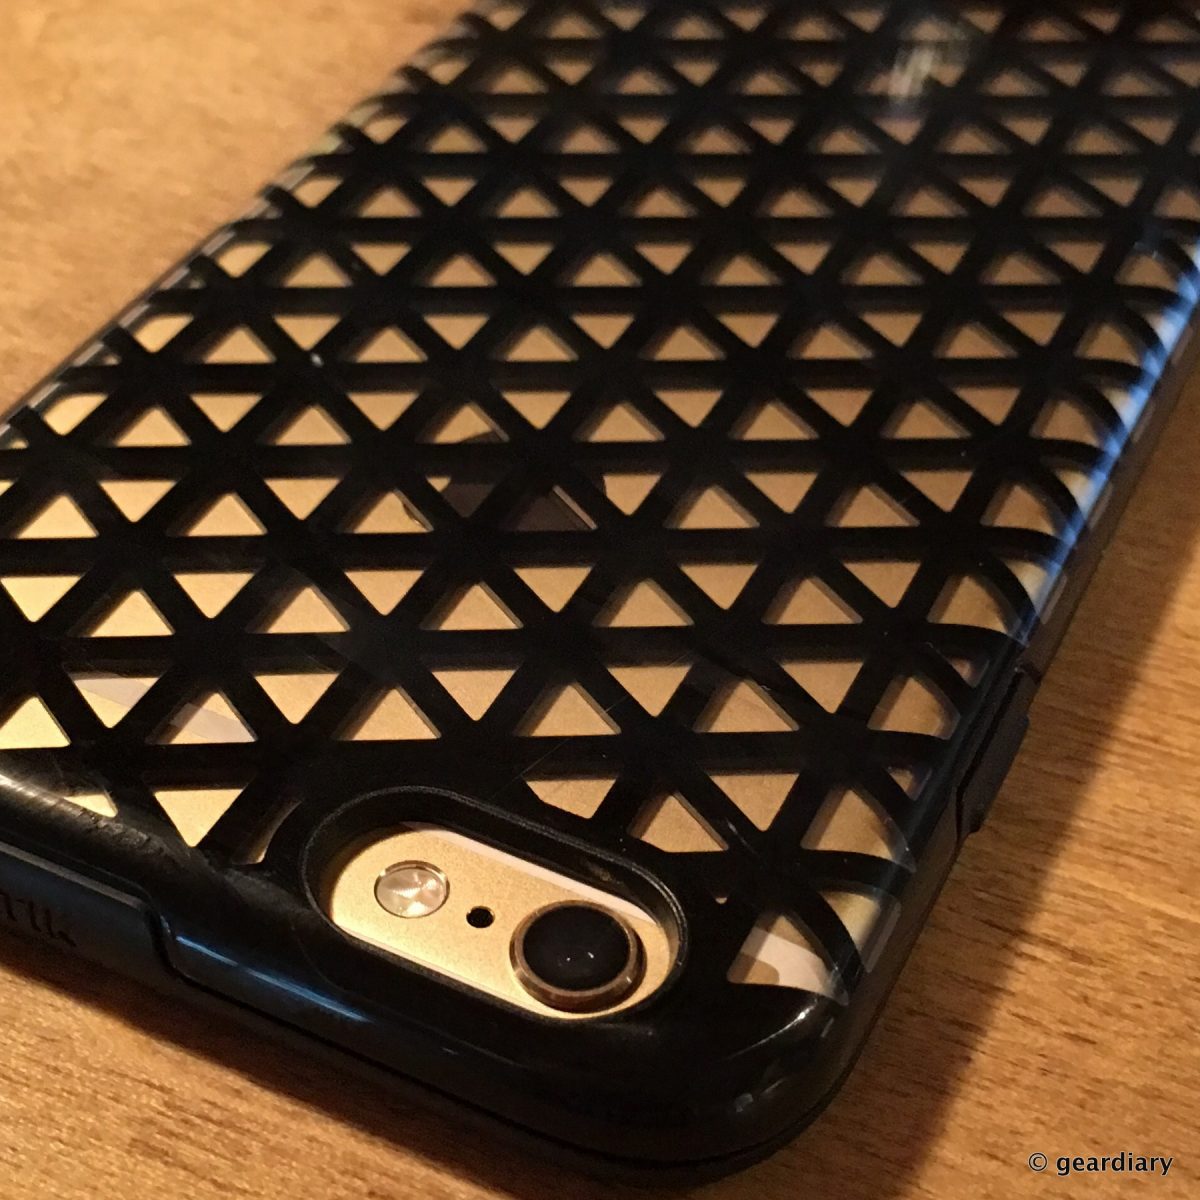 LUNATIK ARCHITEK iPhone 6 Case: Slim, Strong, and Good-Looking Protection